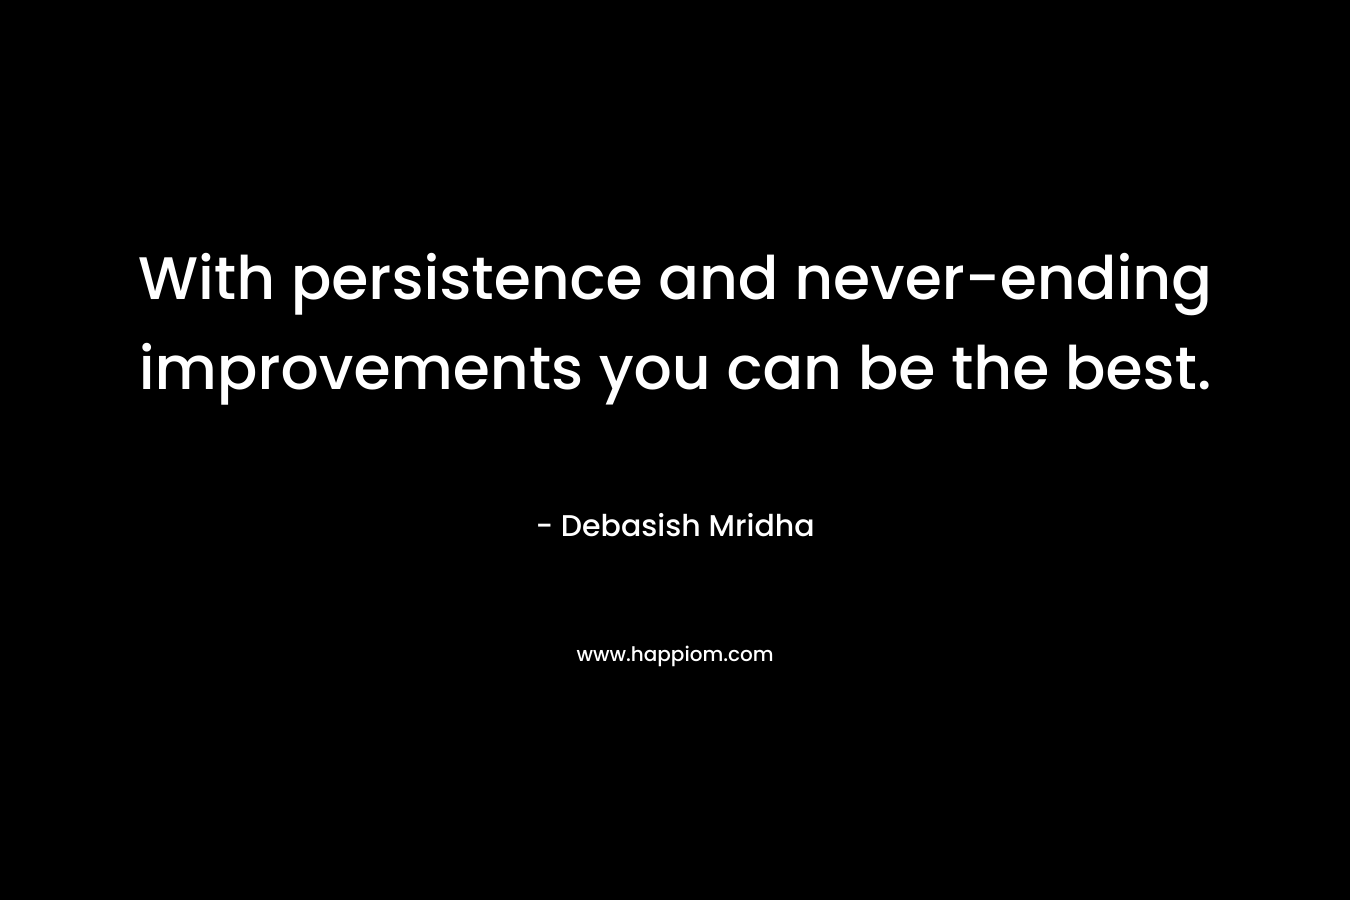 With persistence and never-ending improvements you can be the best.